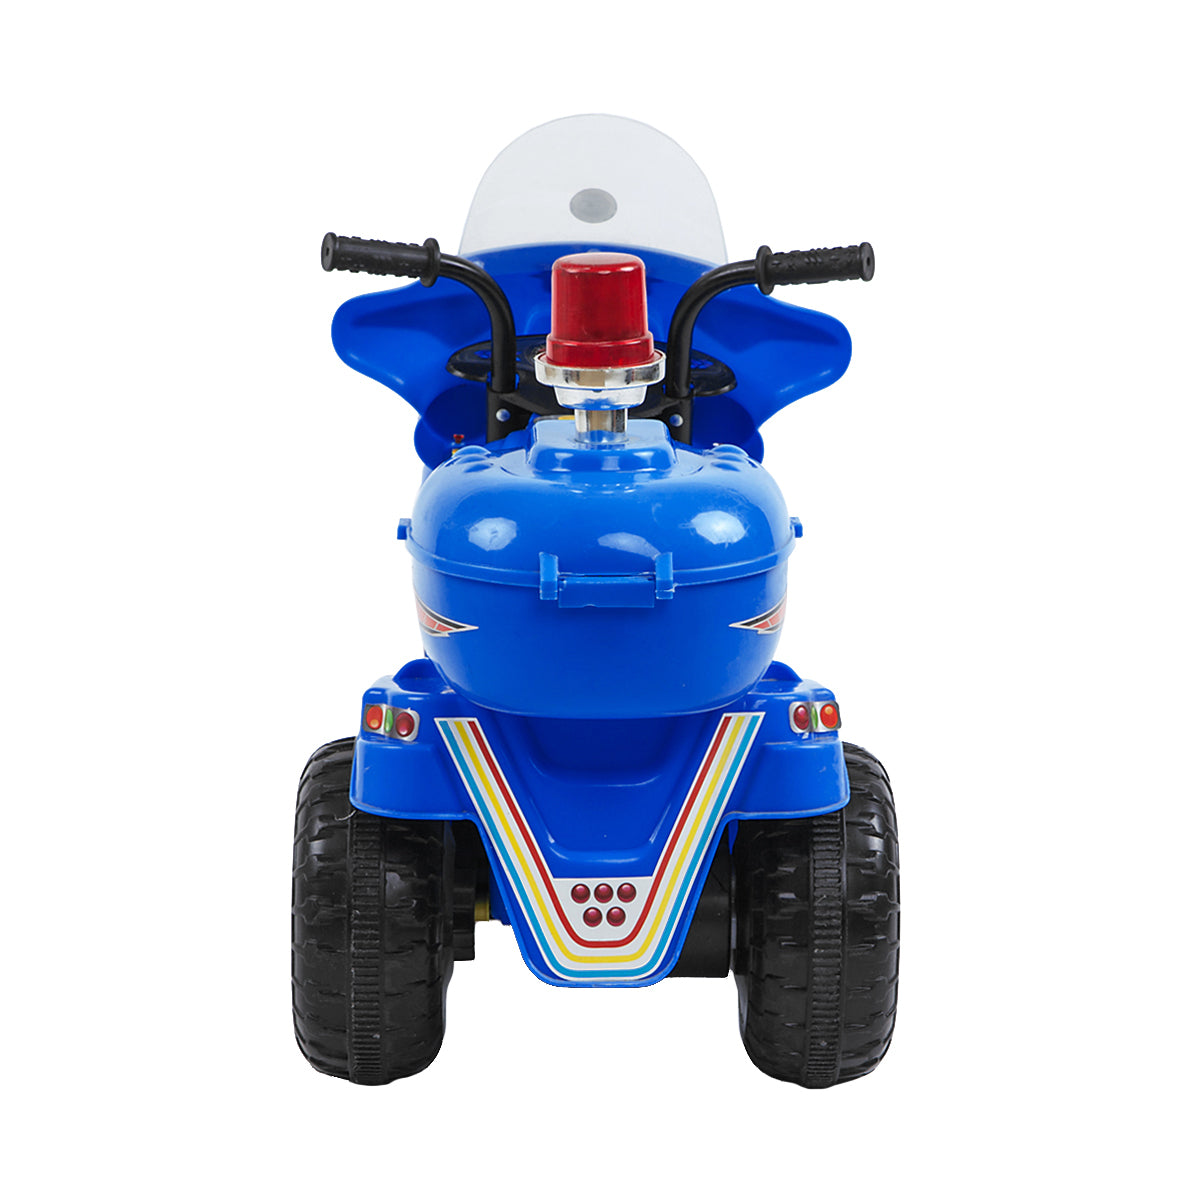 Children's Electric Ride-on Motorcycle (Blue)